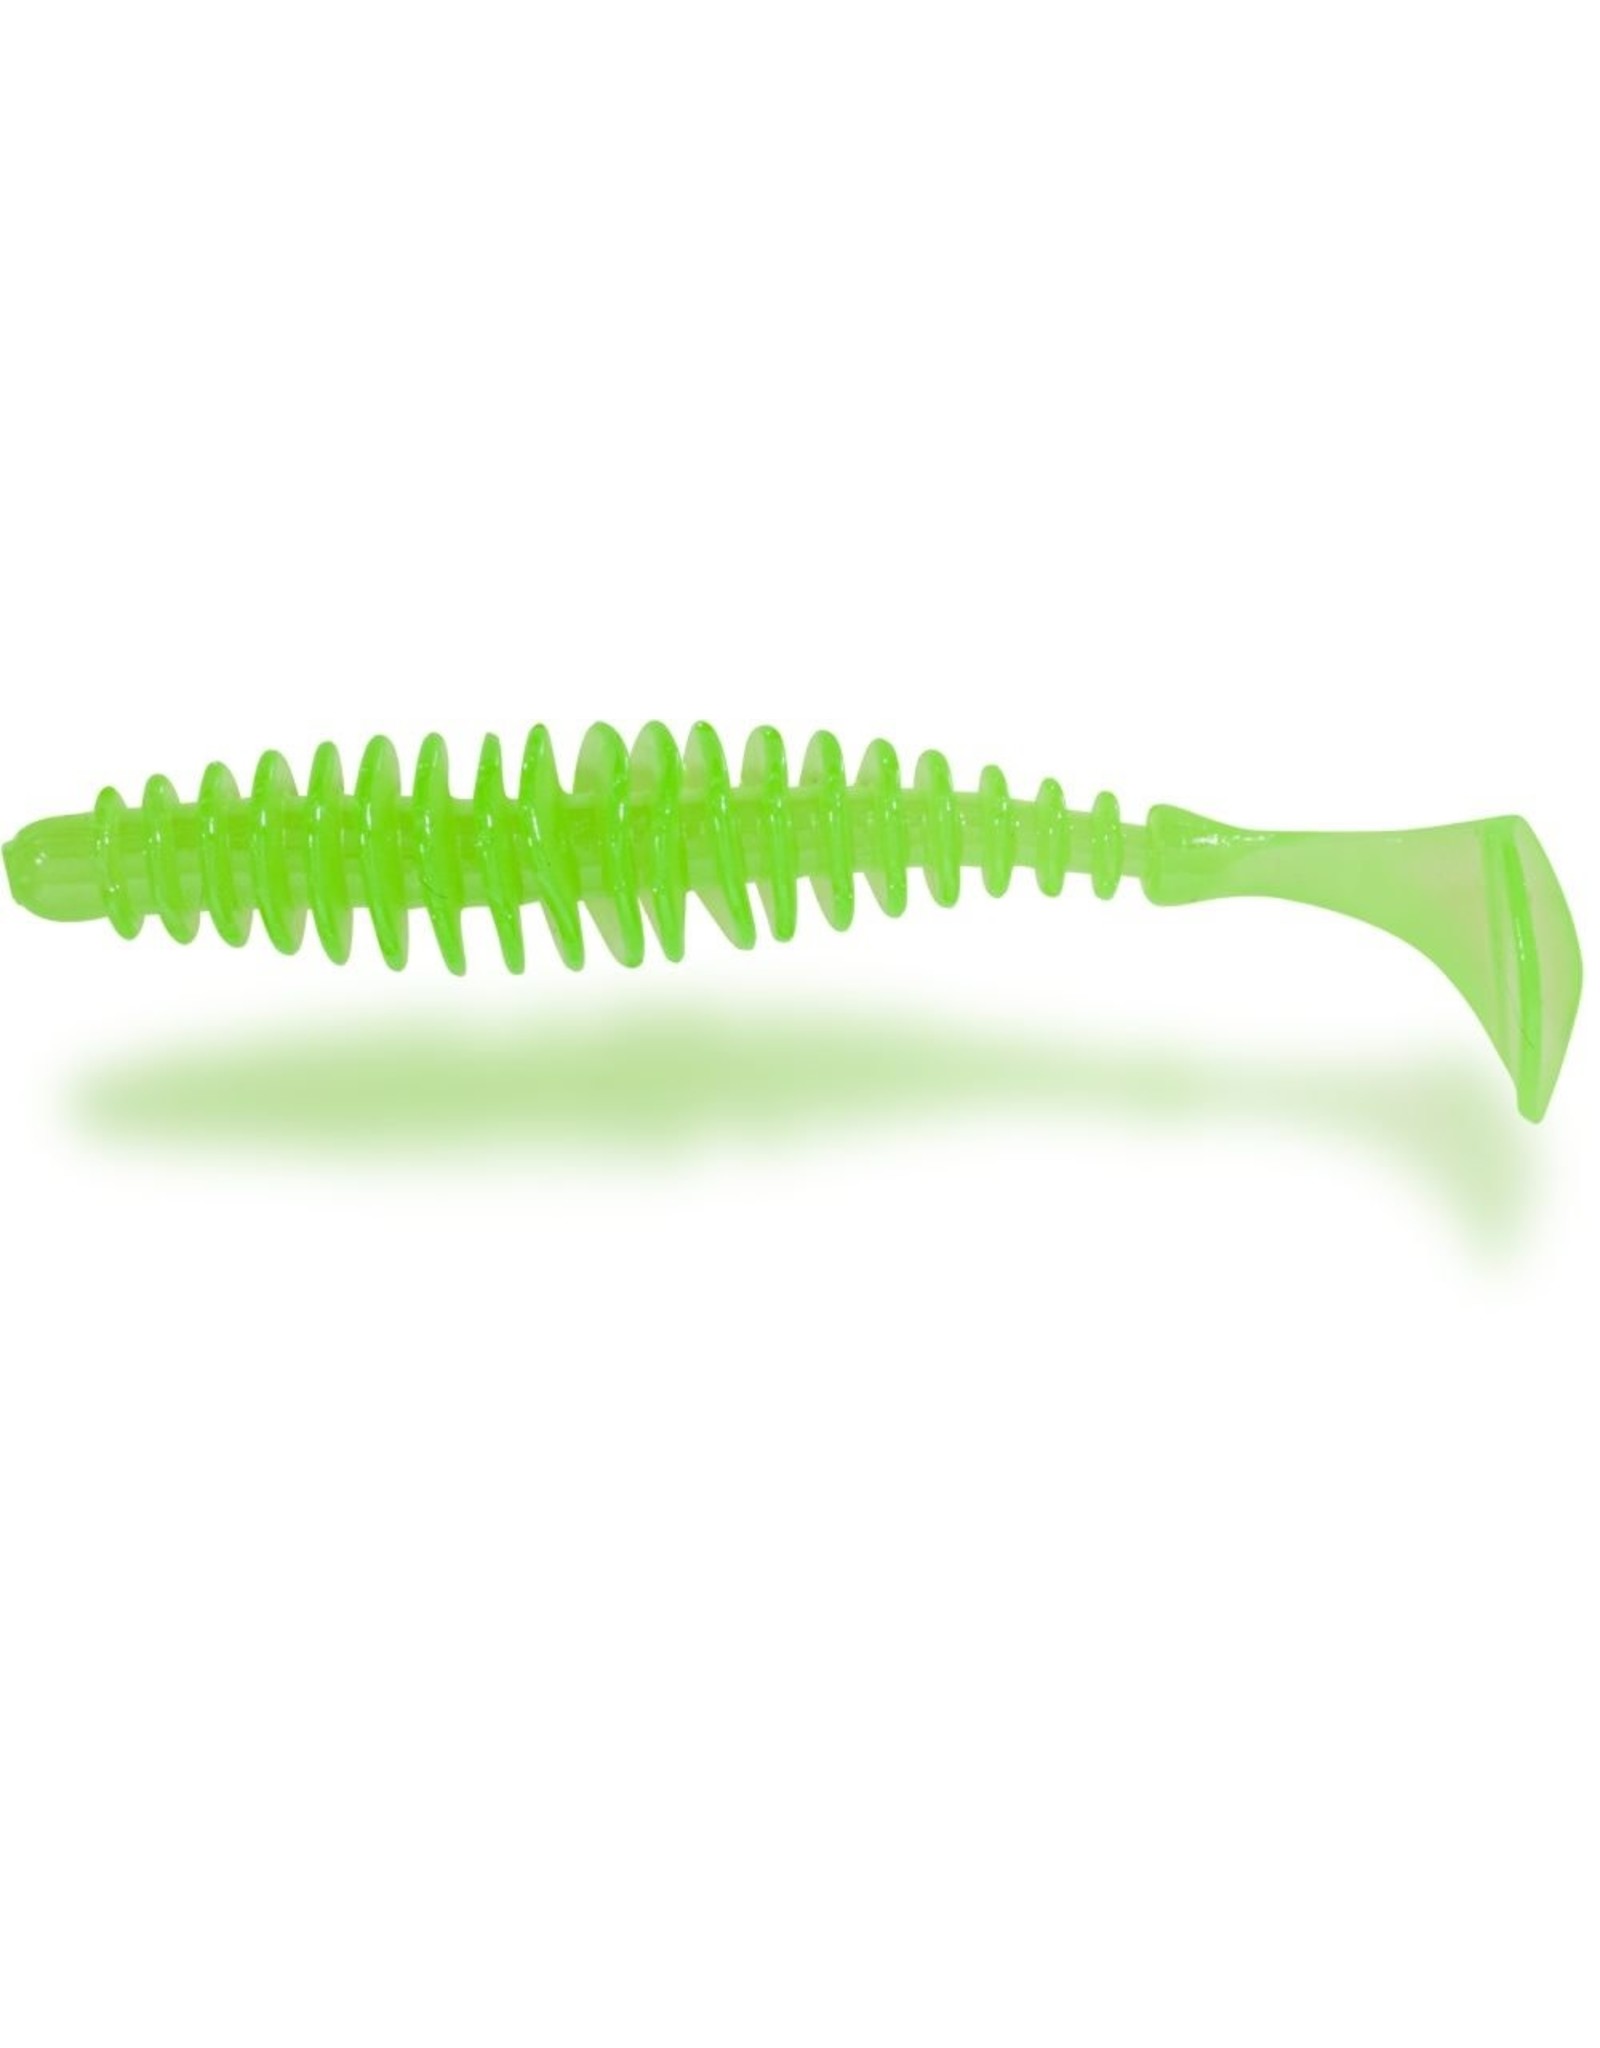 1,5g 5,5cm neon green Magic Trout T-Worm Paddler Cheese 6pcs